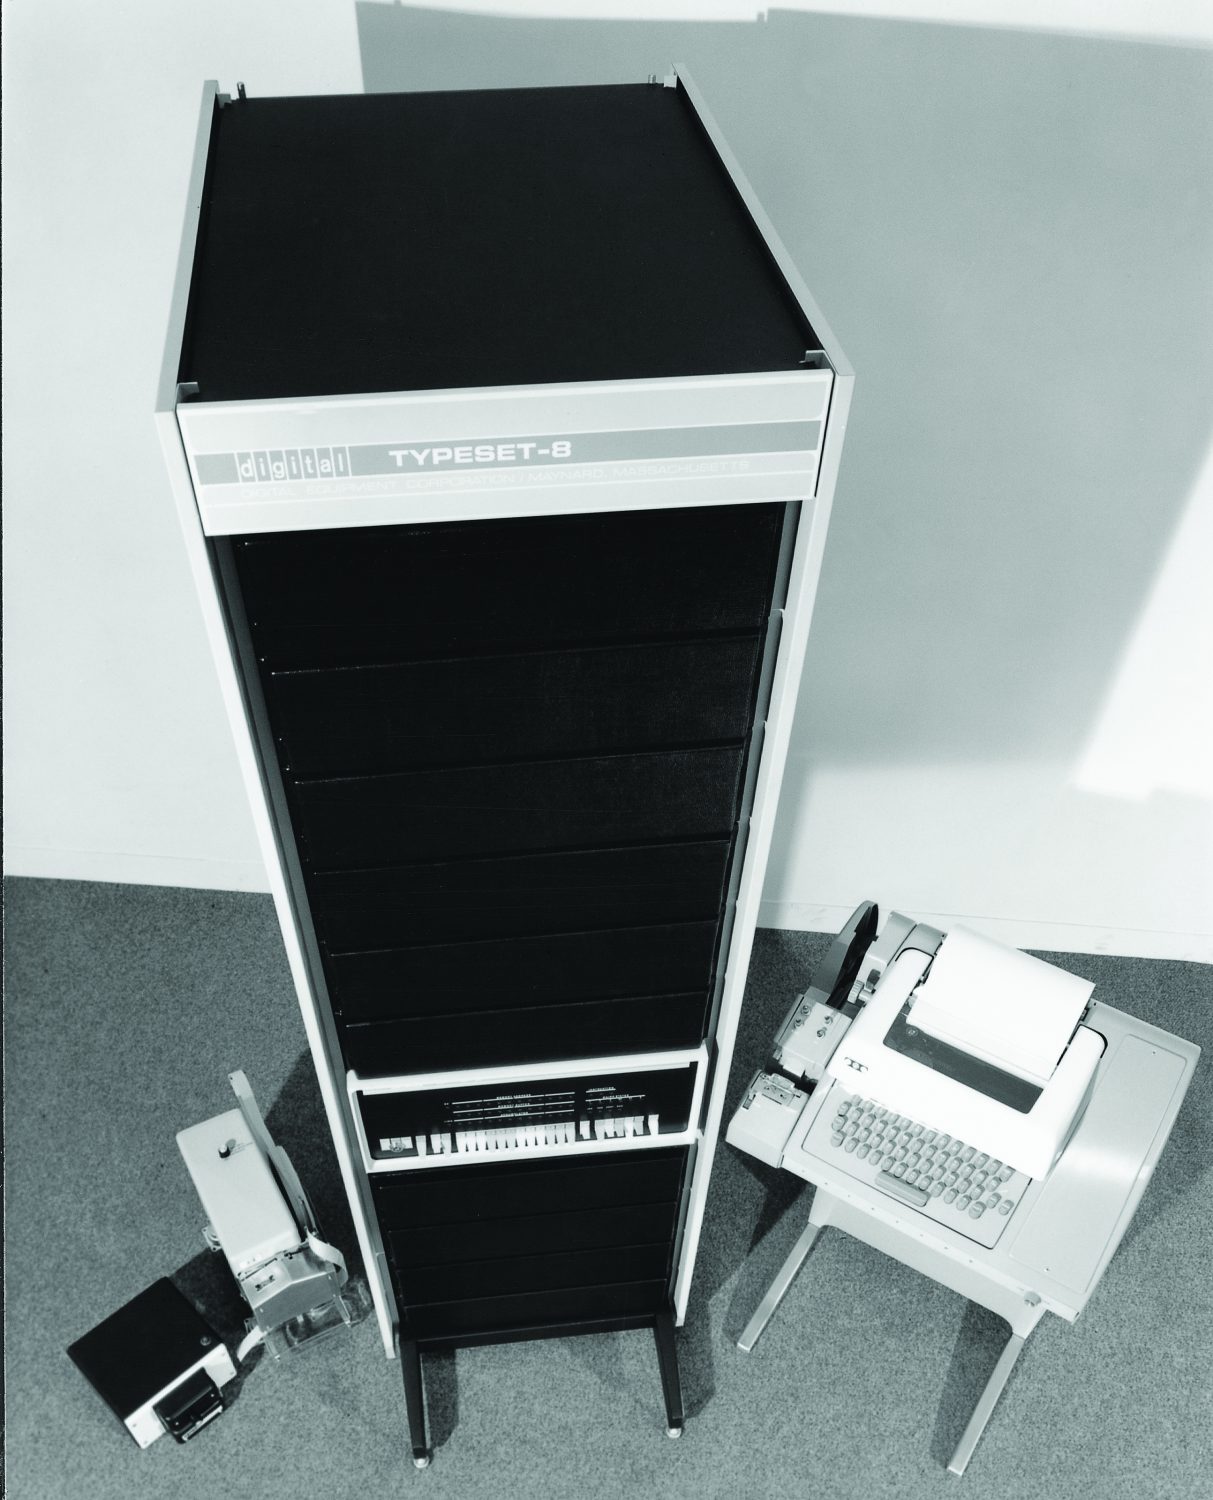 A photo of Digital Equipment Corporation's TYPESET-8, a turnkey computer system from 1968.